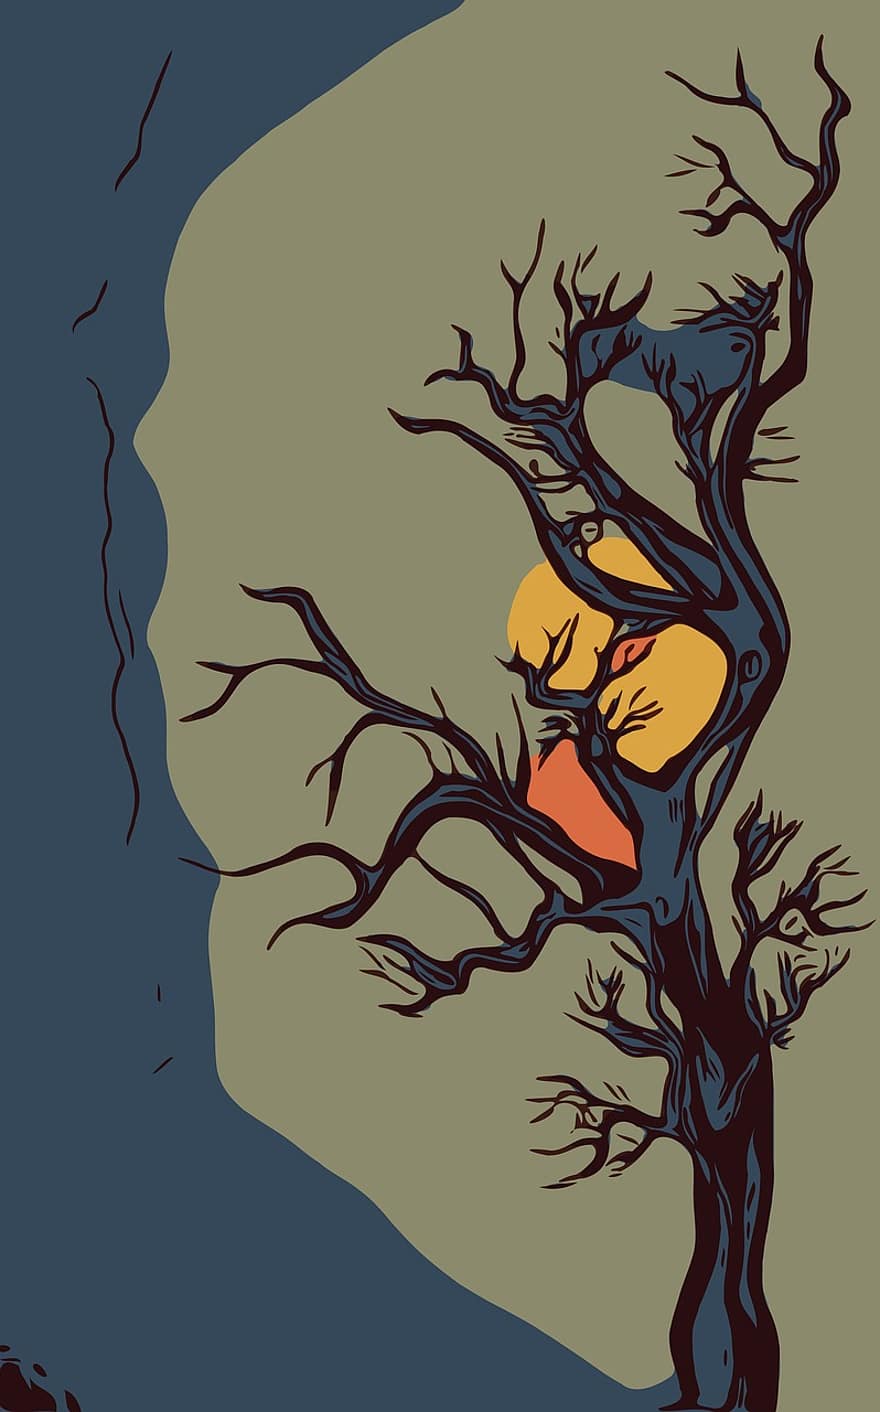 Art, Drawing, Abstract, Blue, Yellow, Winter, Concept, Tree, Asian, Design, Japanese